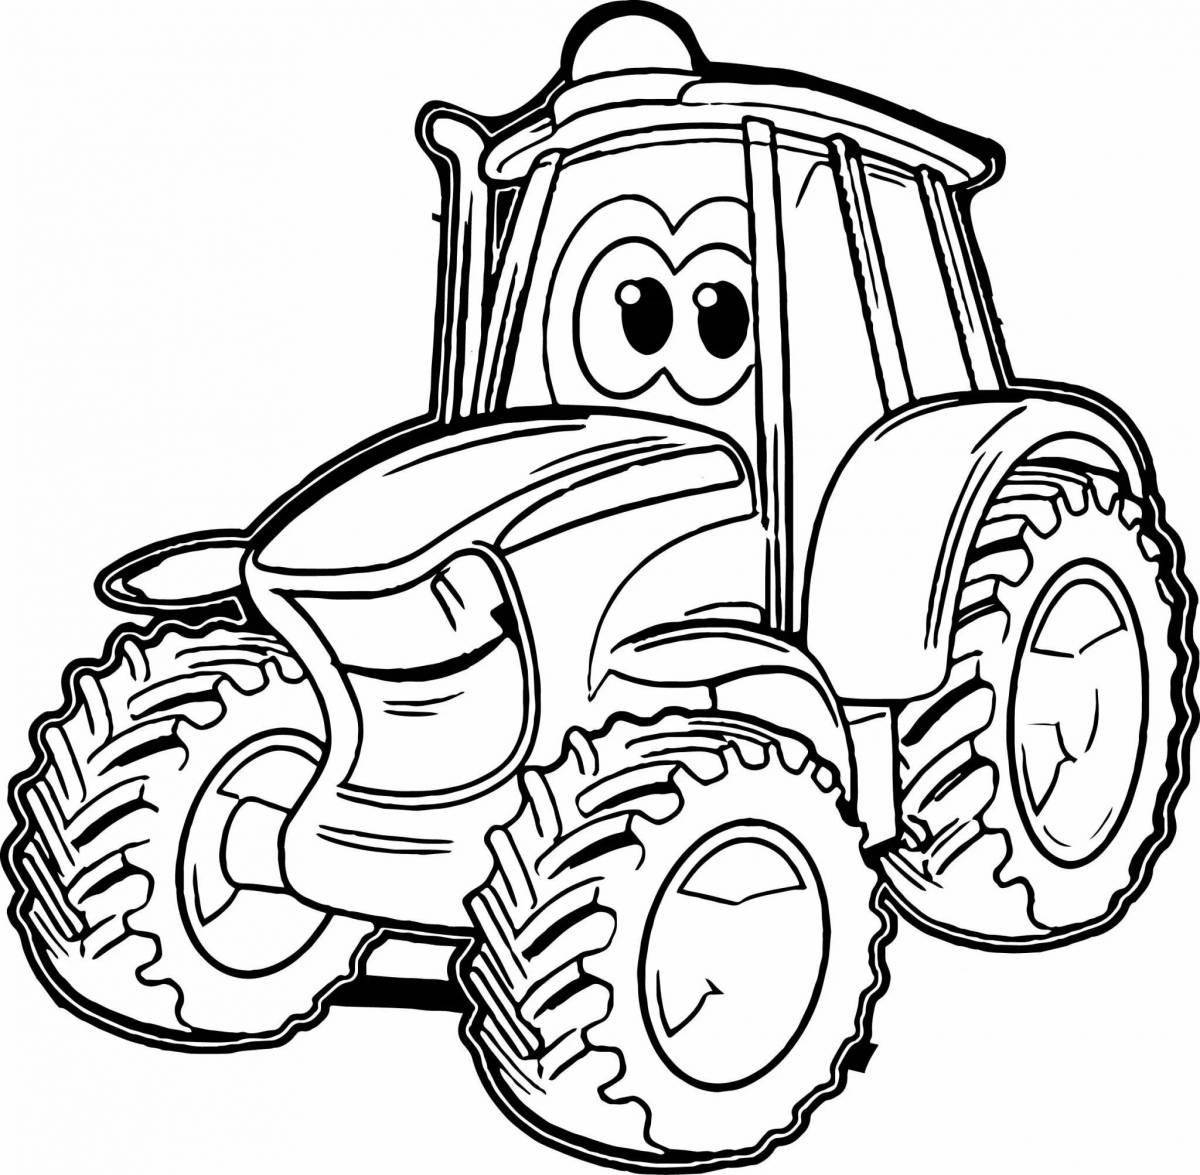 Exquisite blue tractor coloring page